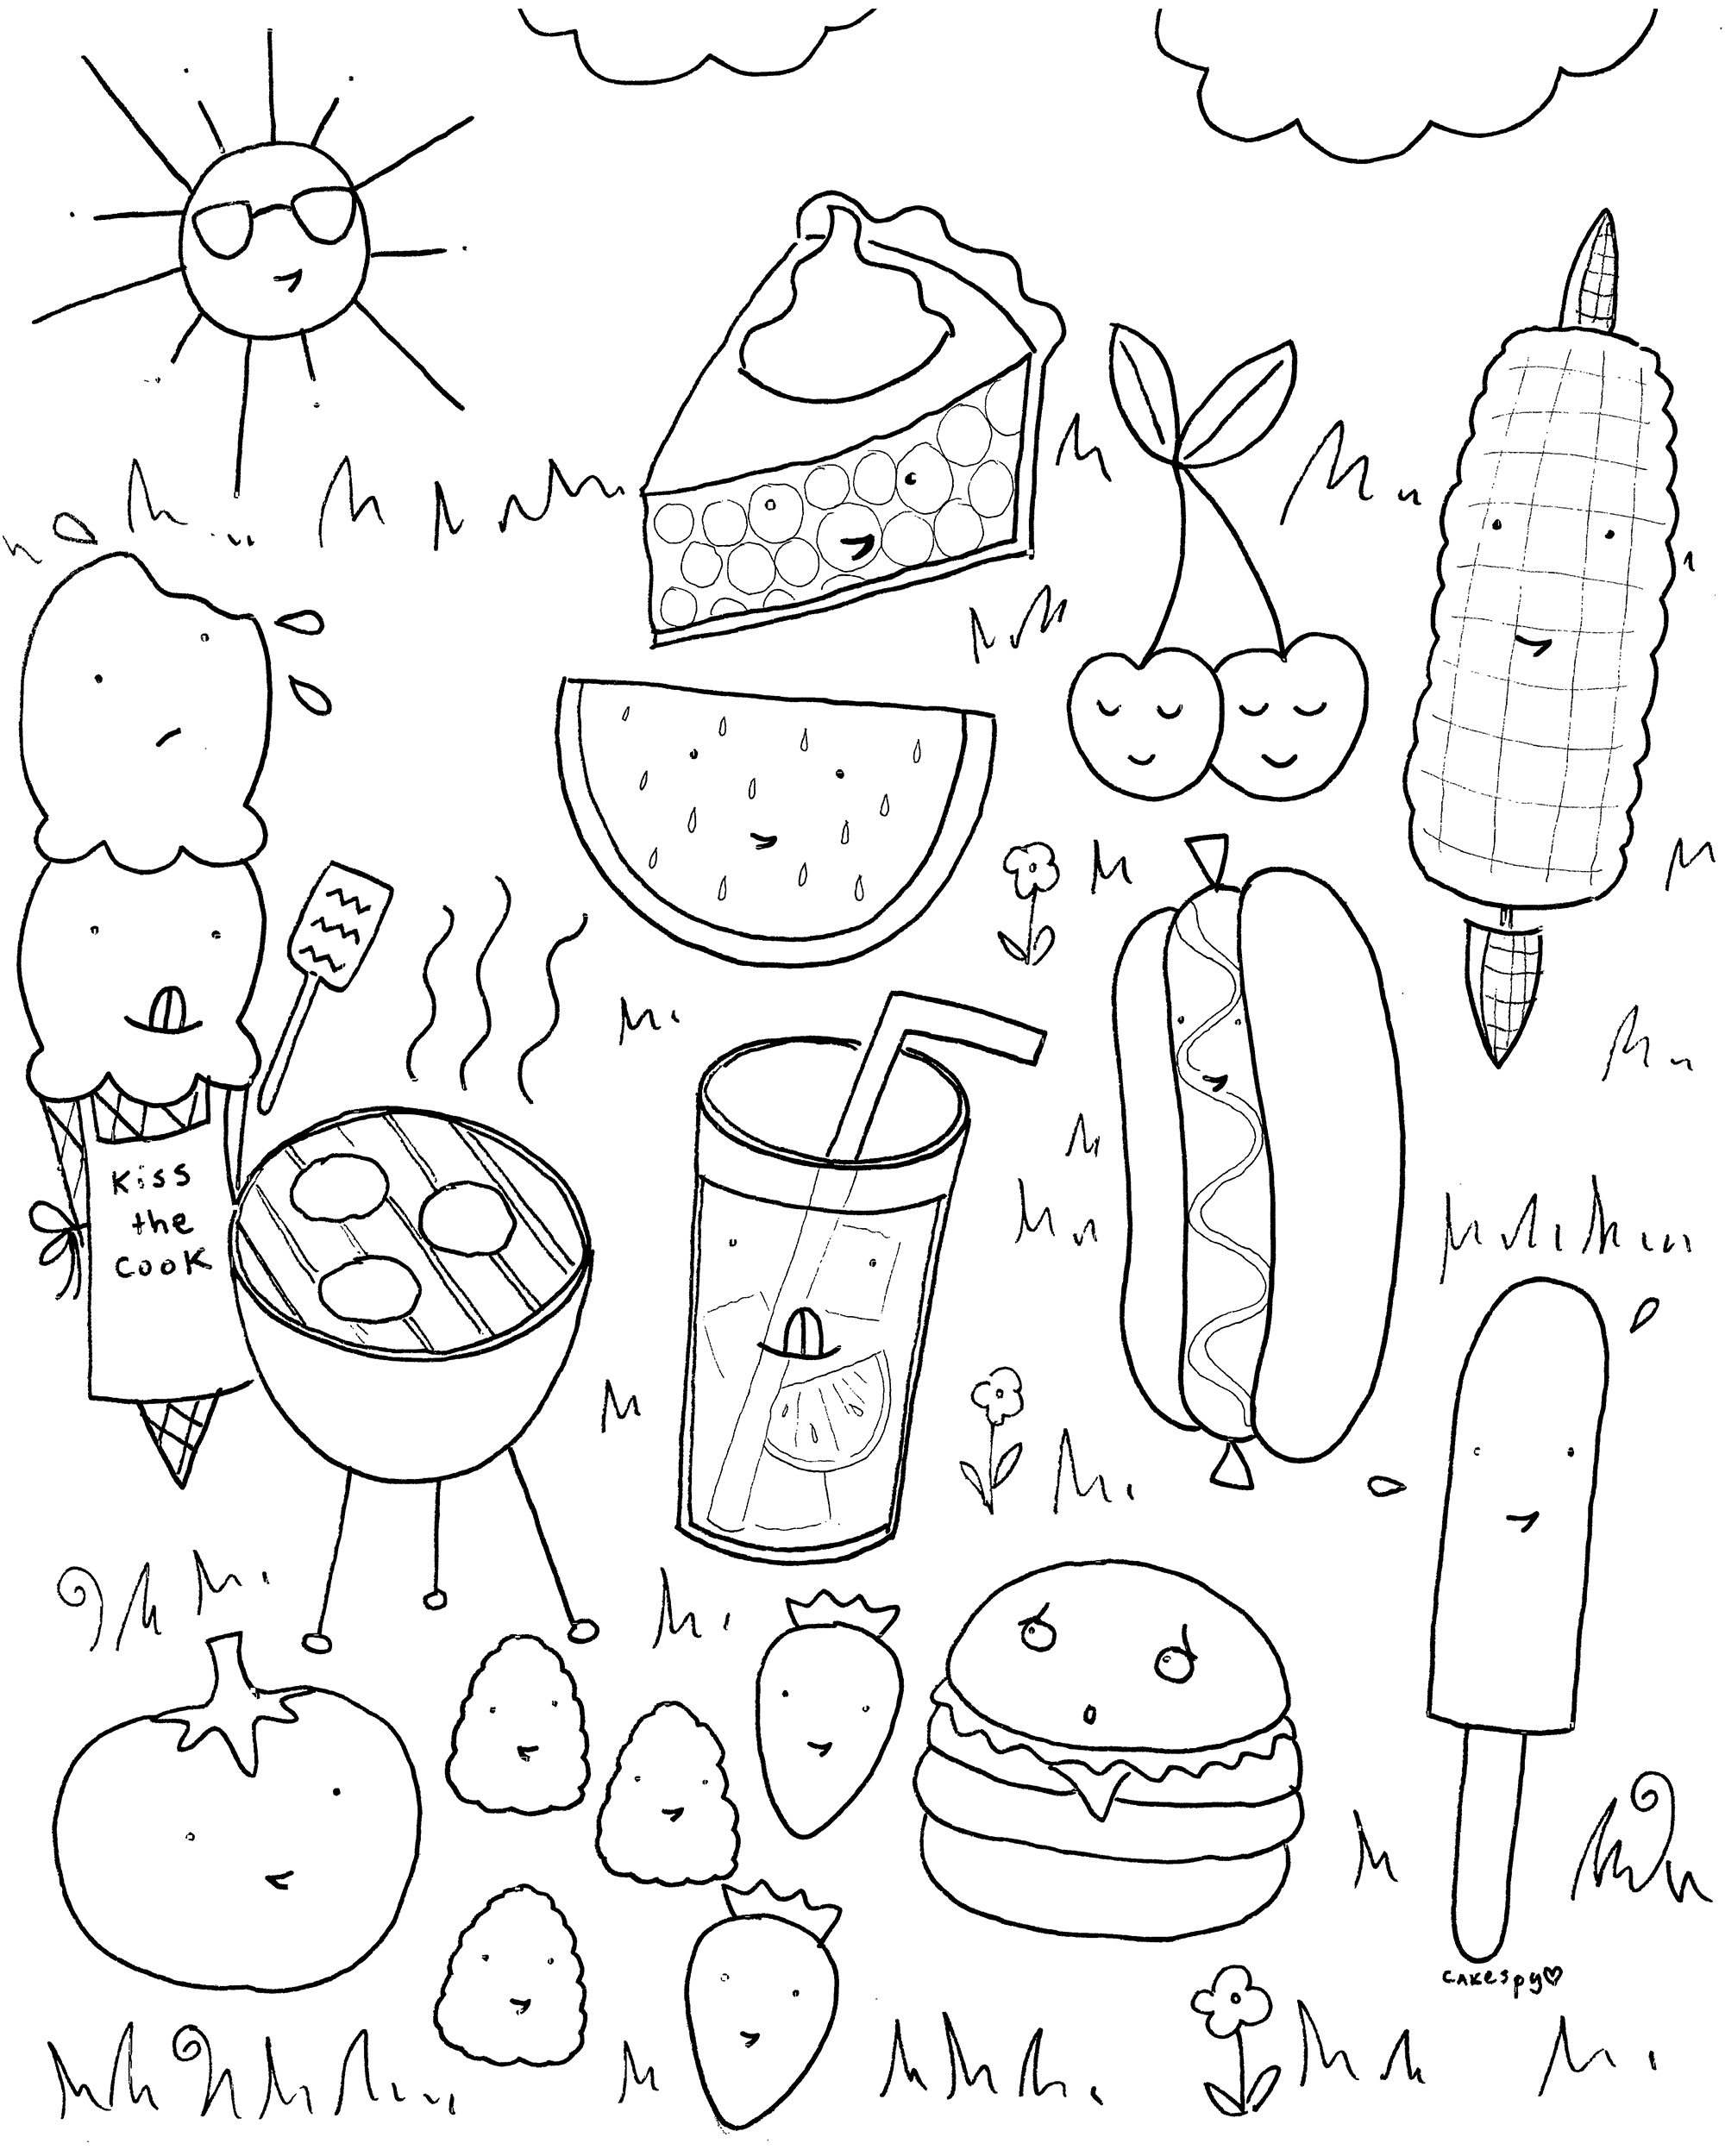 Summer fun coloring book pages